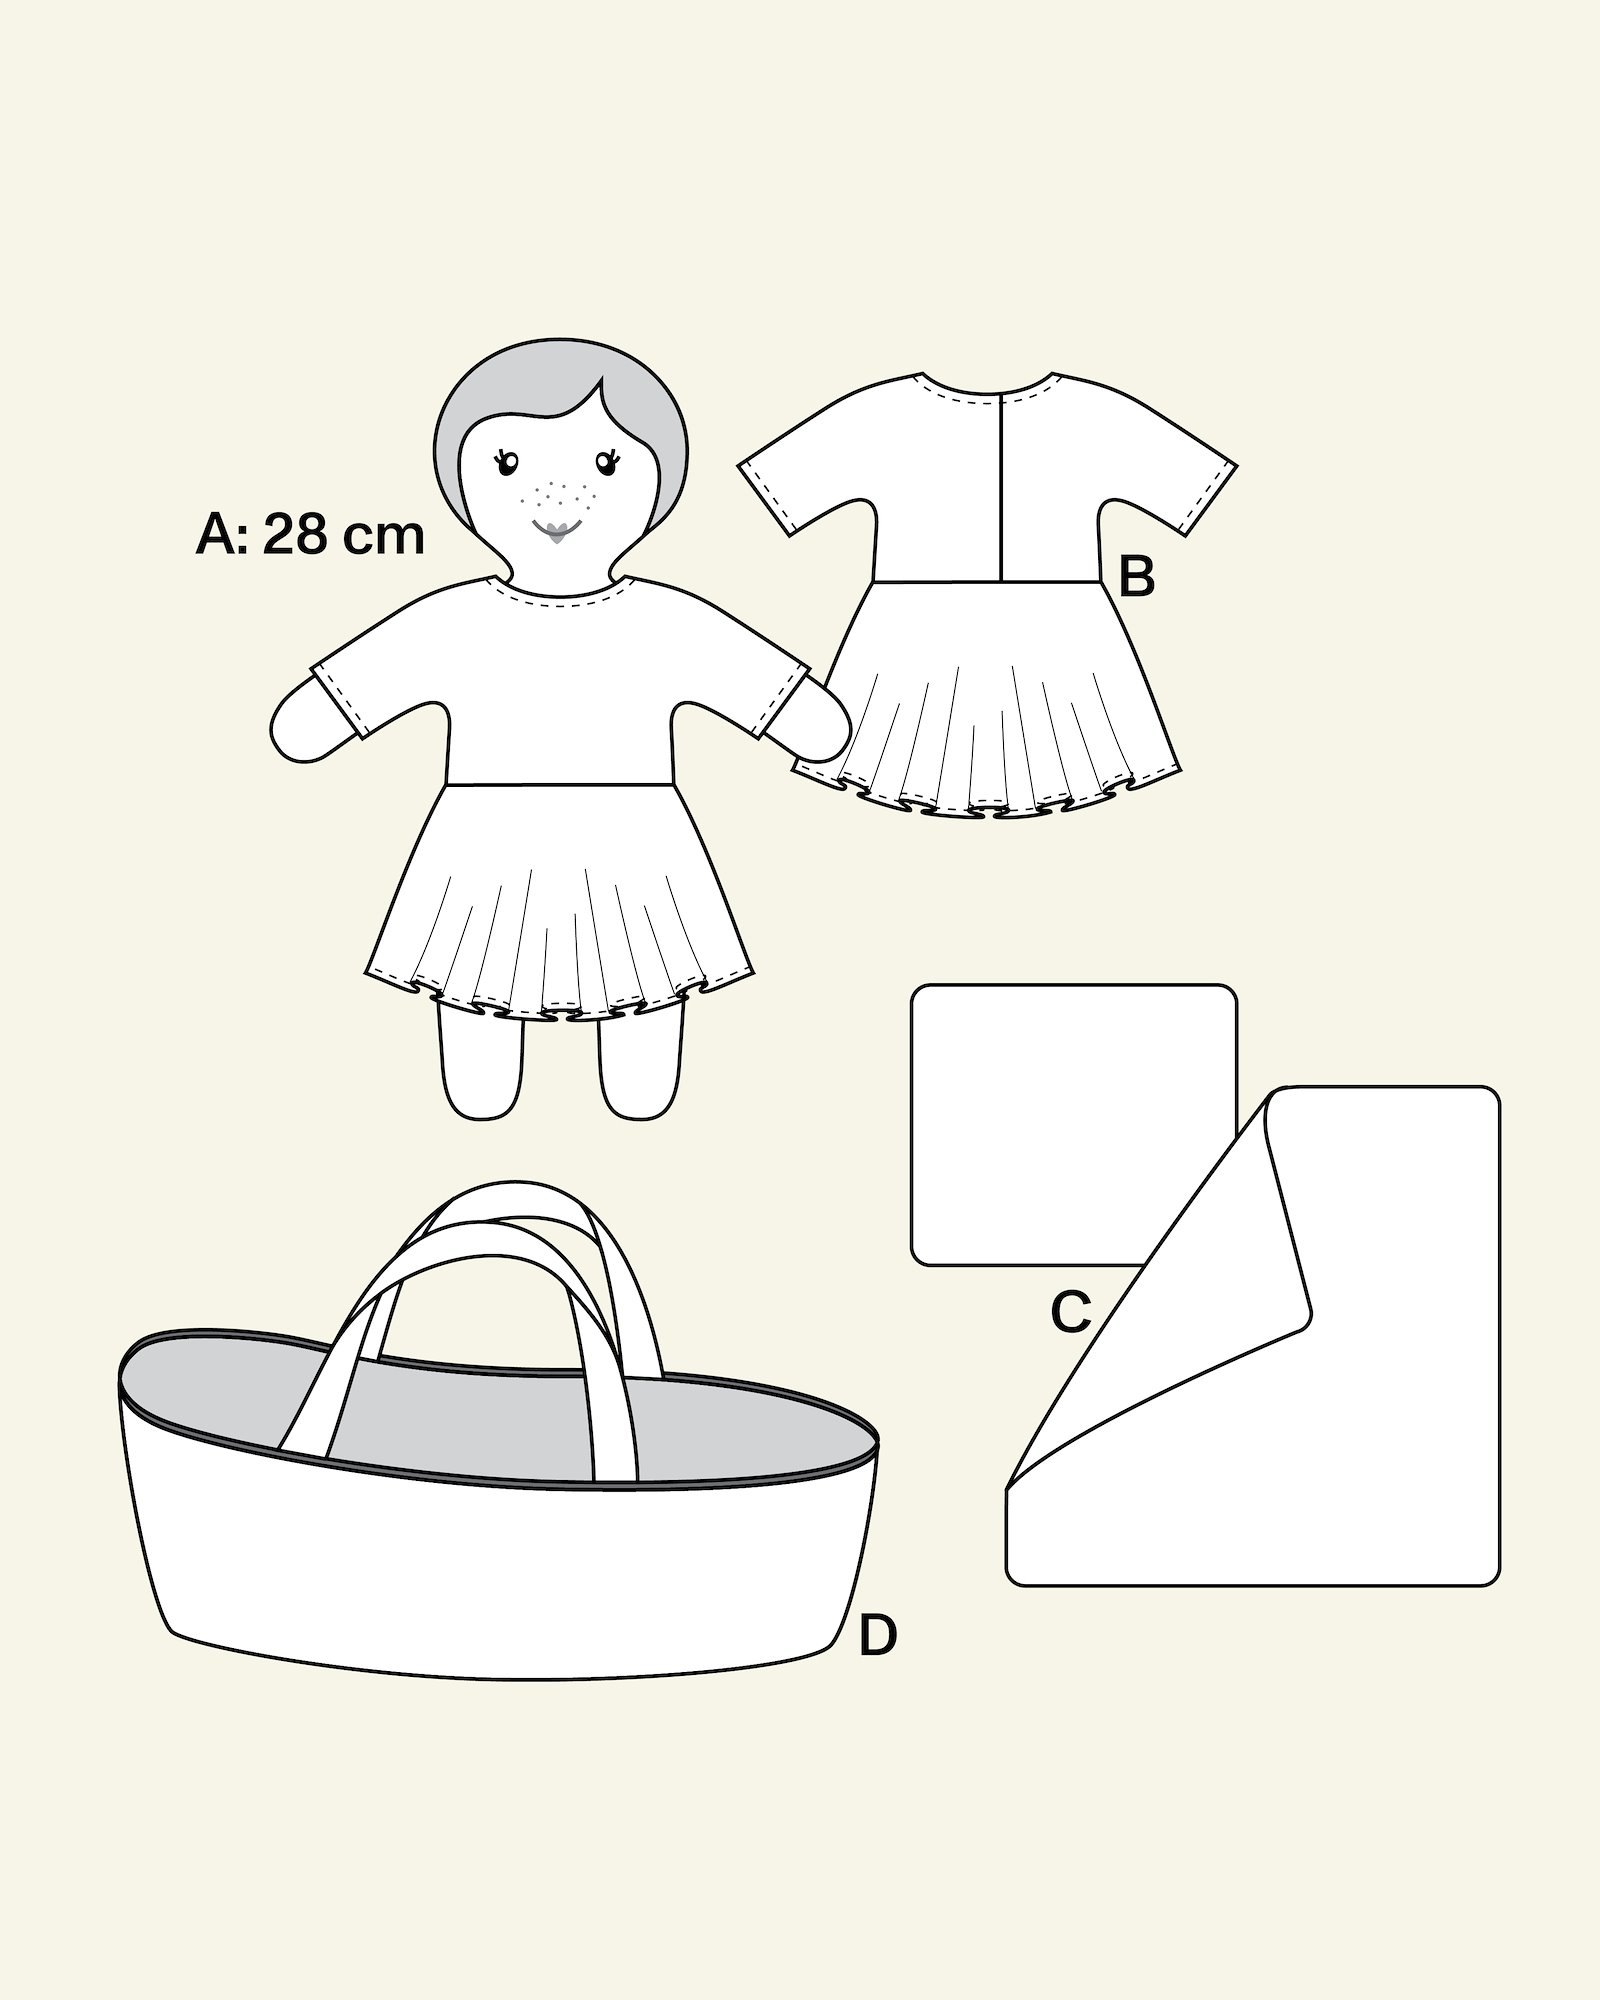 Mini doll with clothes and carrycot p90326_pack